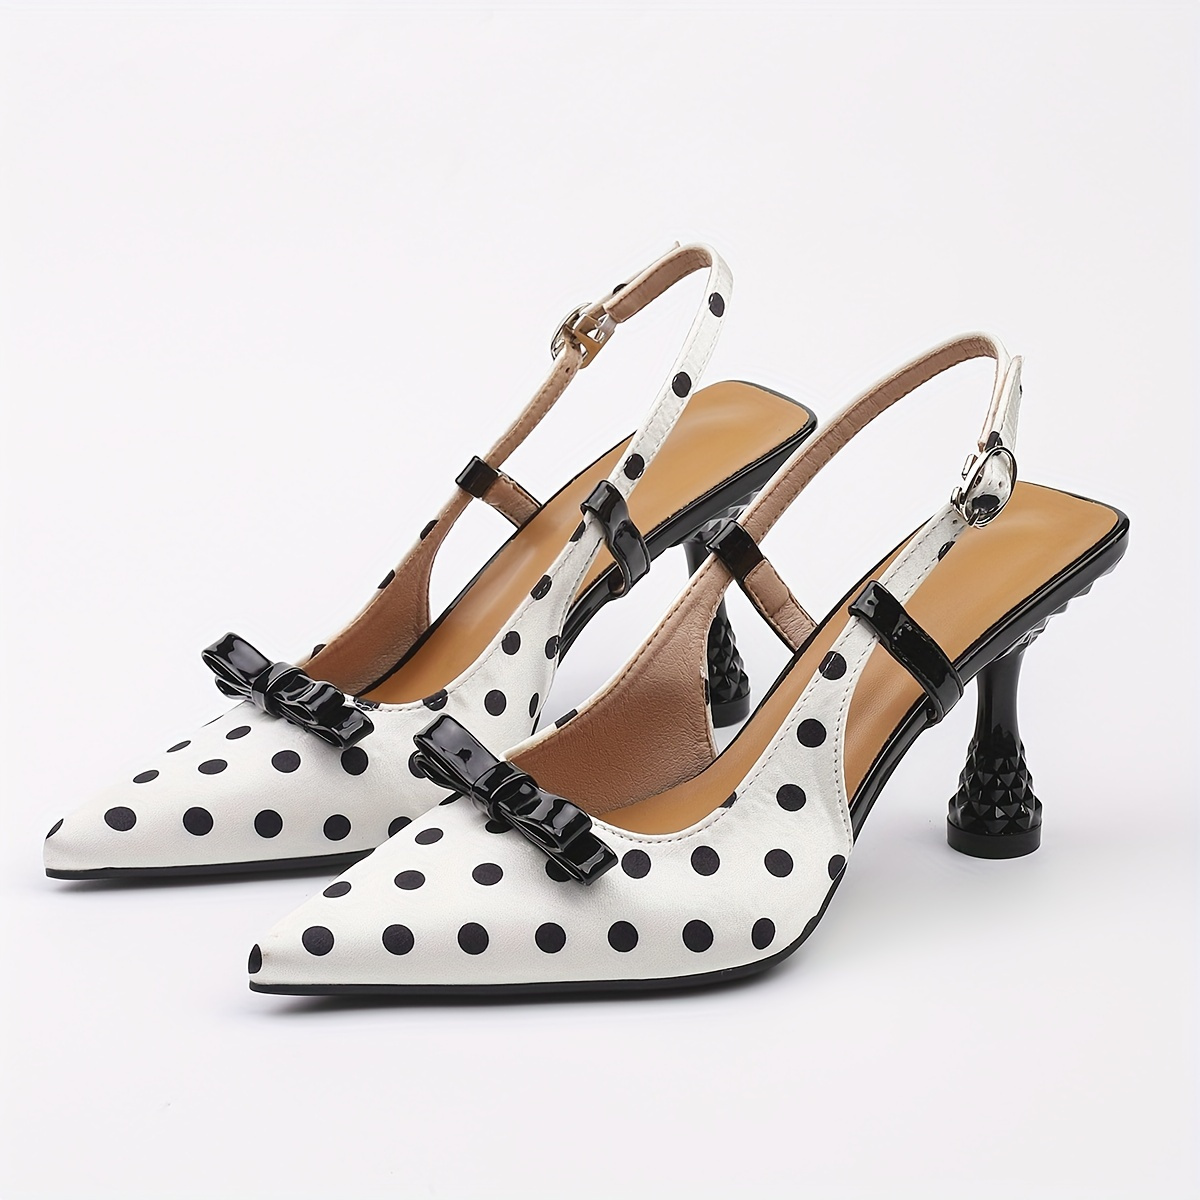 

Women's Elegant Slingback Heels, Polka Dot Pointed Toe Pumps With Adjustable Strap, Chic Bowknot Mules